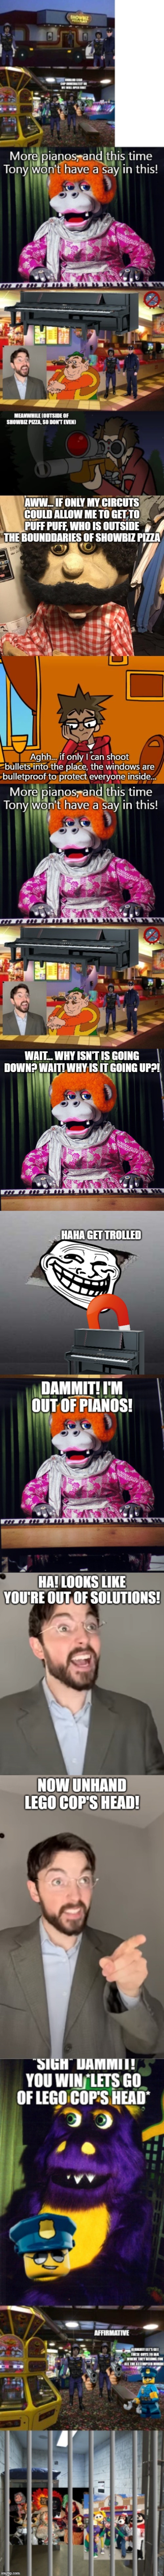 Troll Face has stolen your piano | made w/ Imgflip meme maker